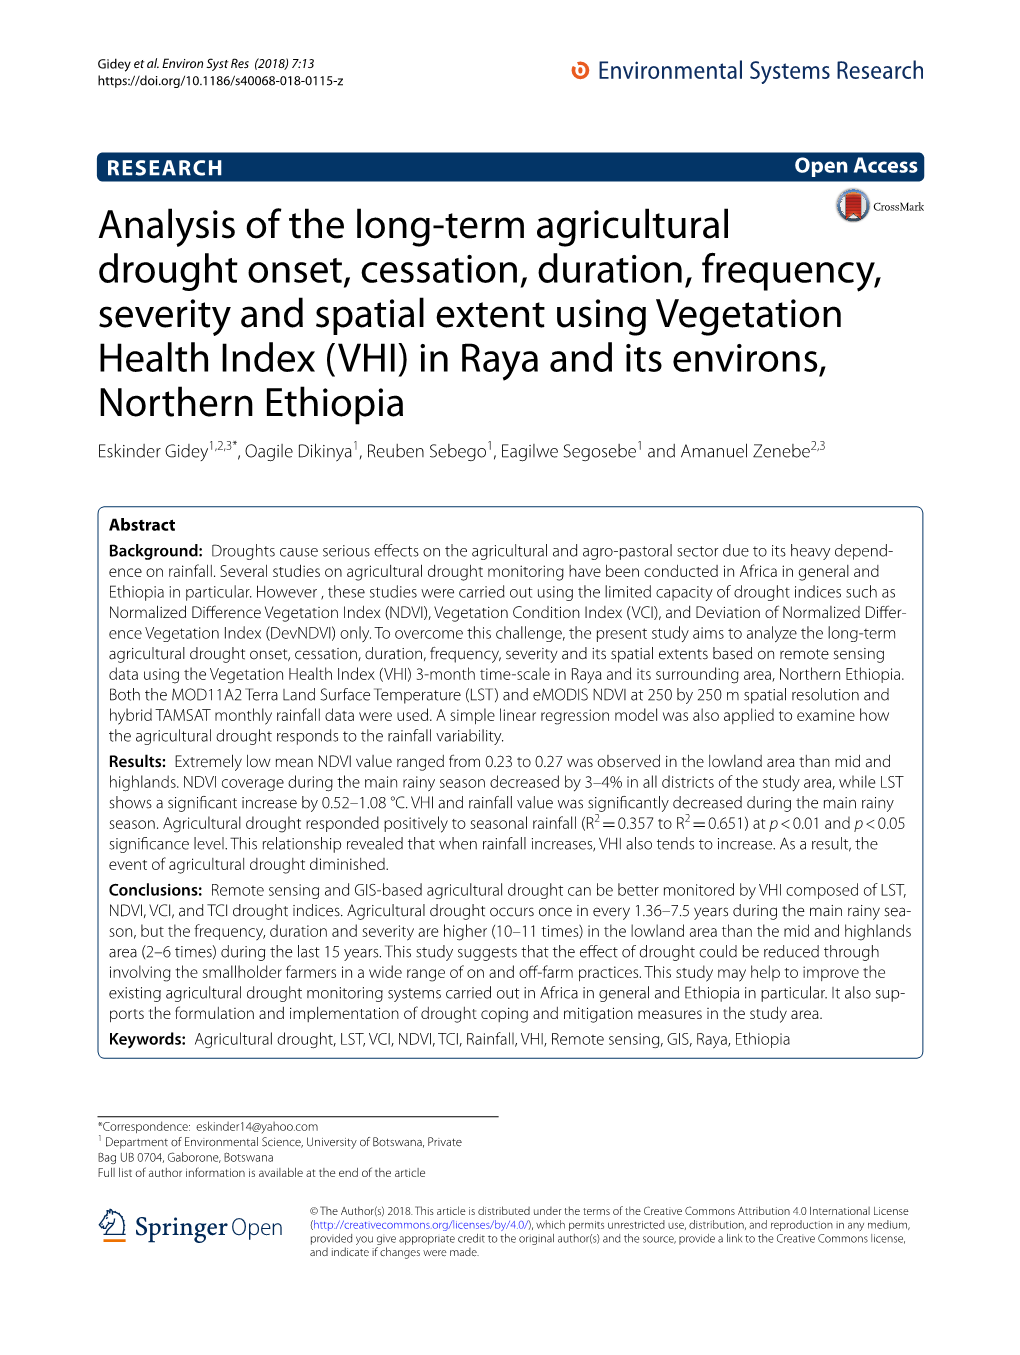 Analysis of the Long-Term Agricultural Drought Onset, Cessation, Duration